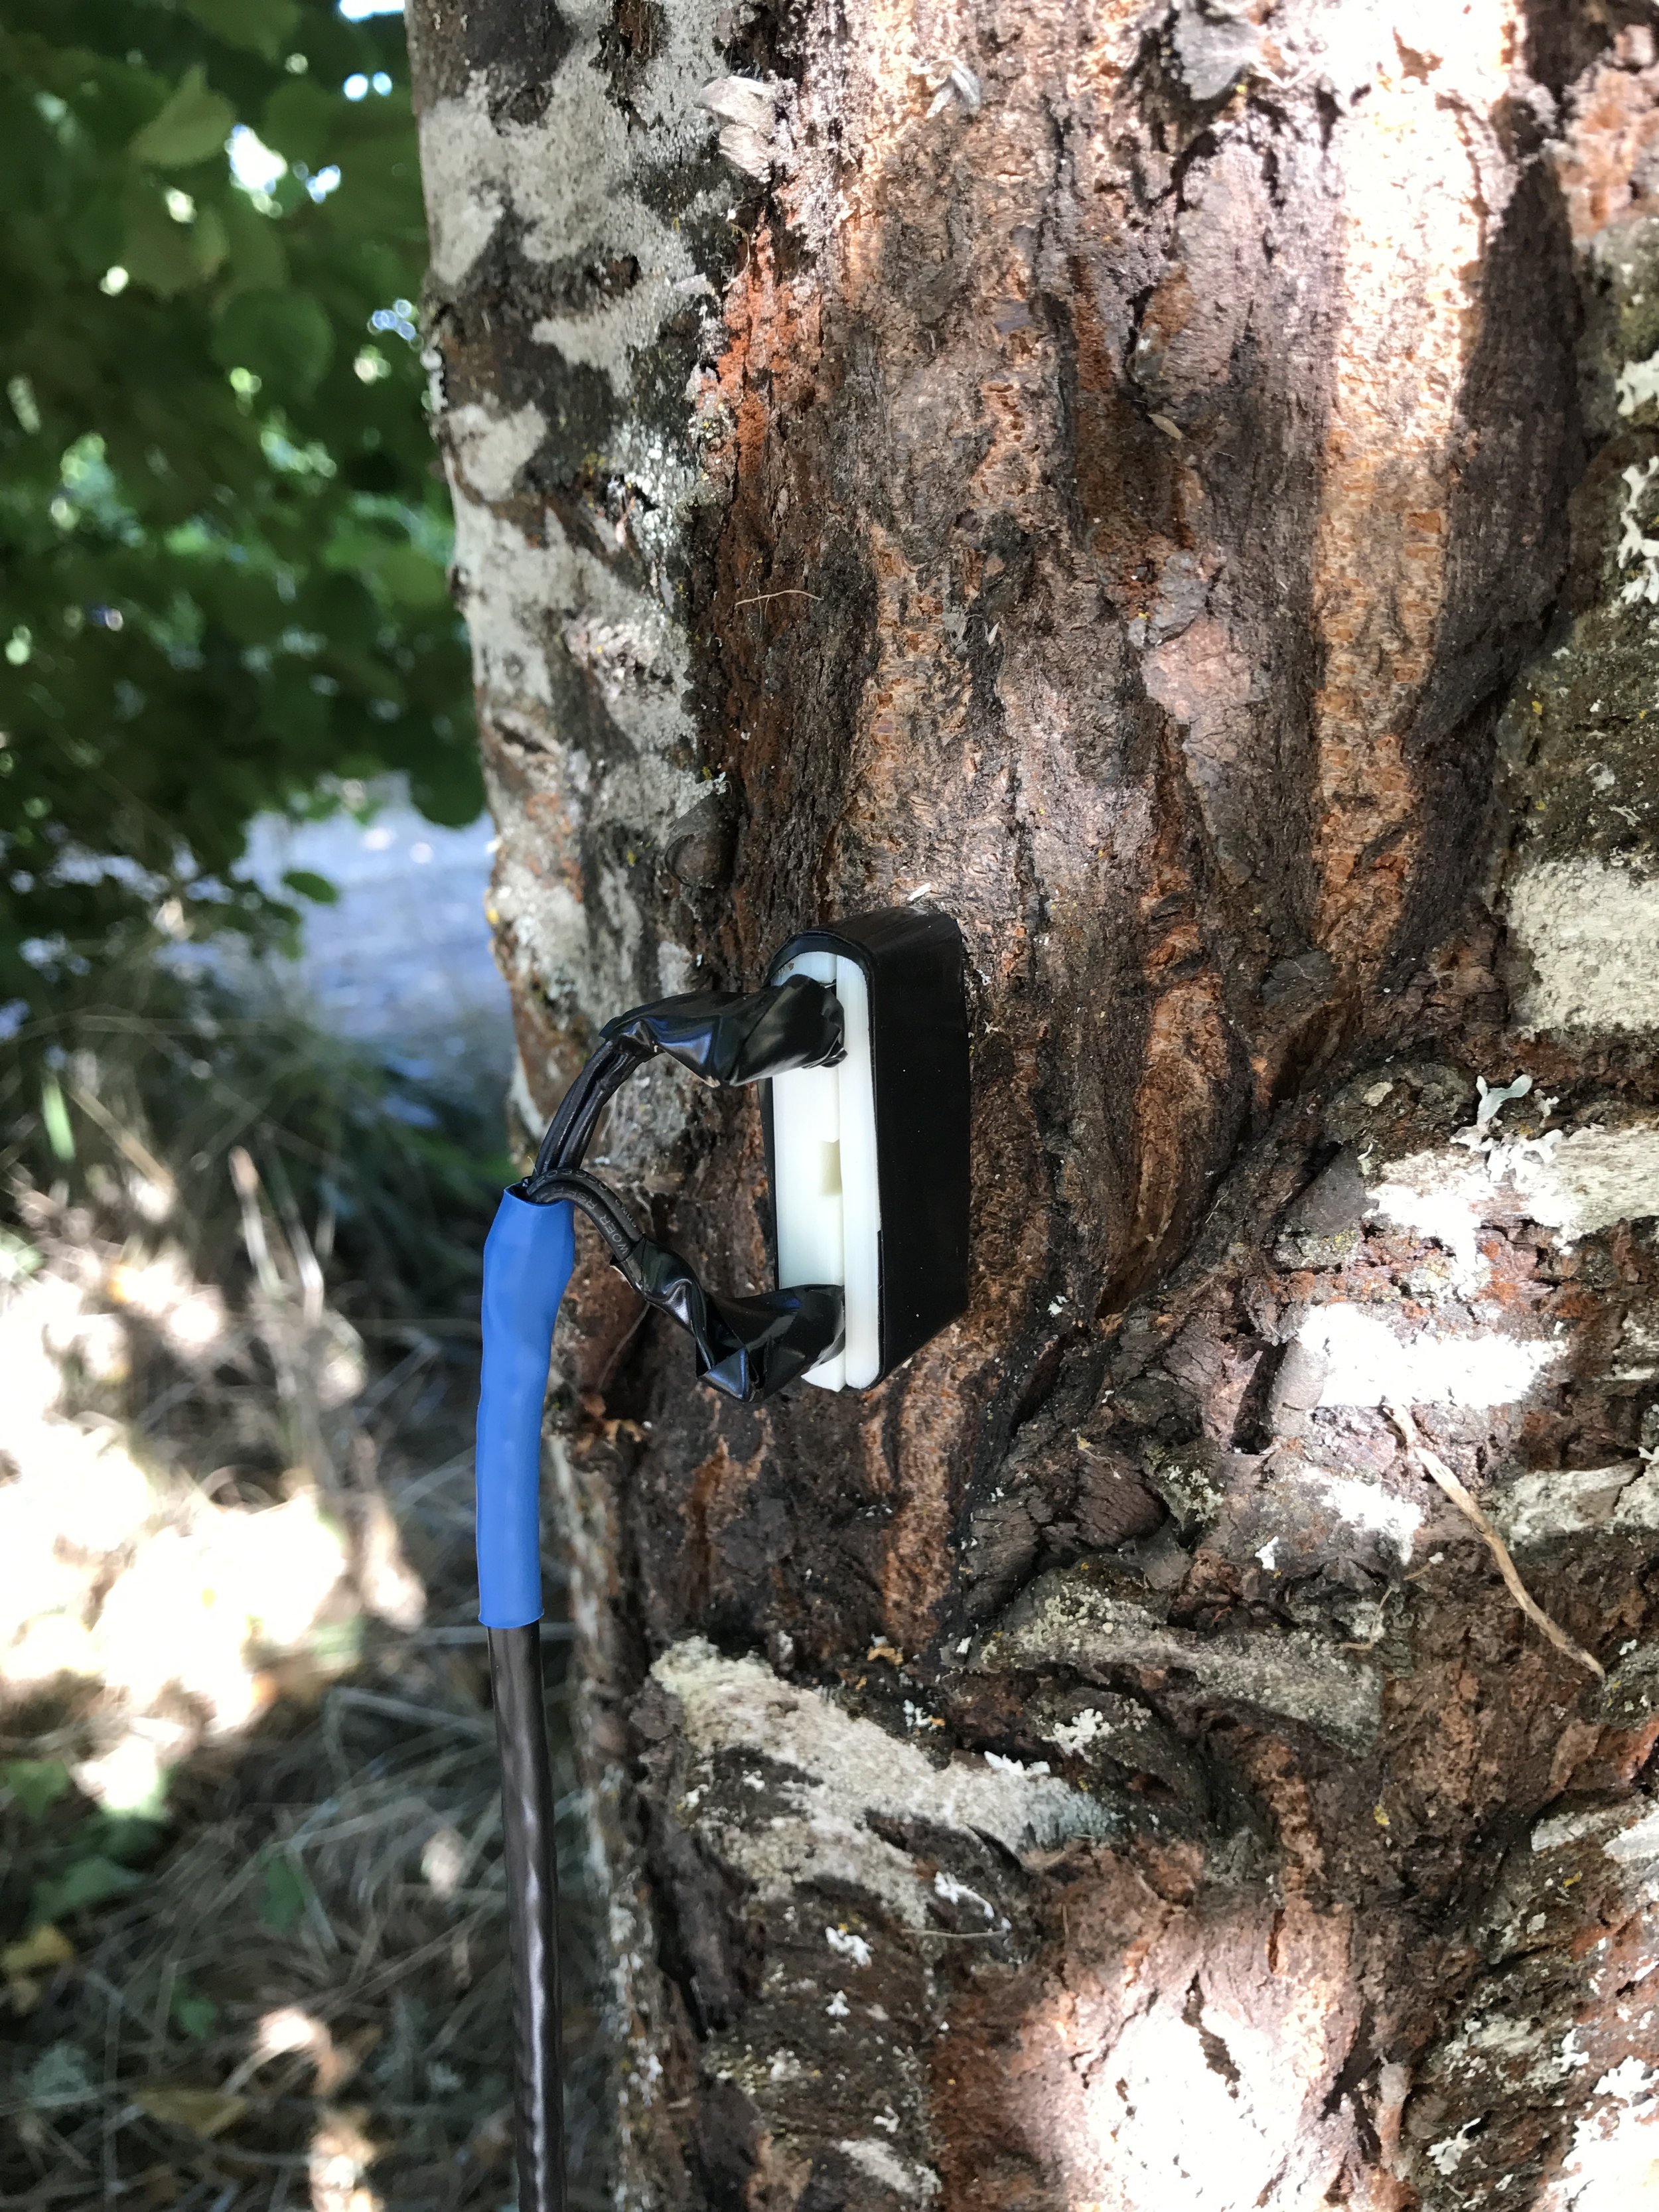 Our TDM Probe in the Tree! The probes fit perfectly into the drilled holes with properly applied epoxy. For a guide on how to test and to see our data, go check out our tree test page!